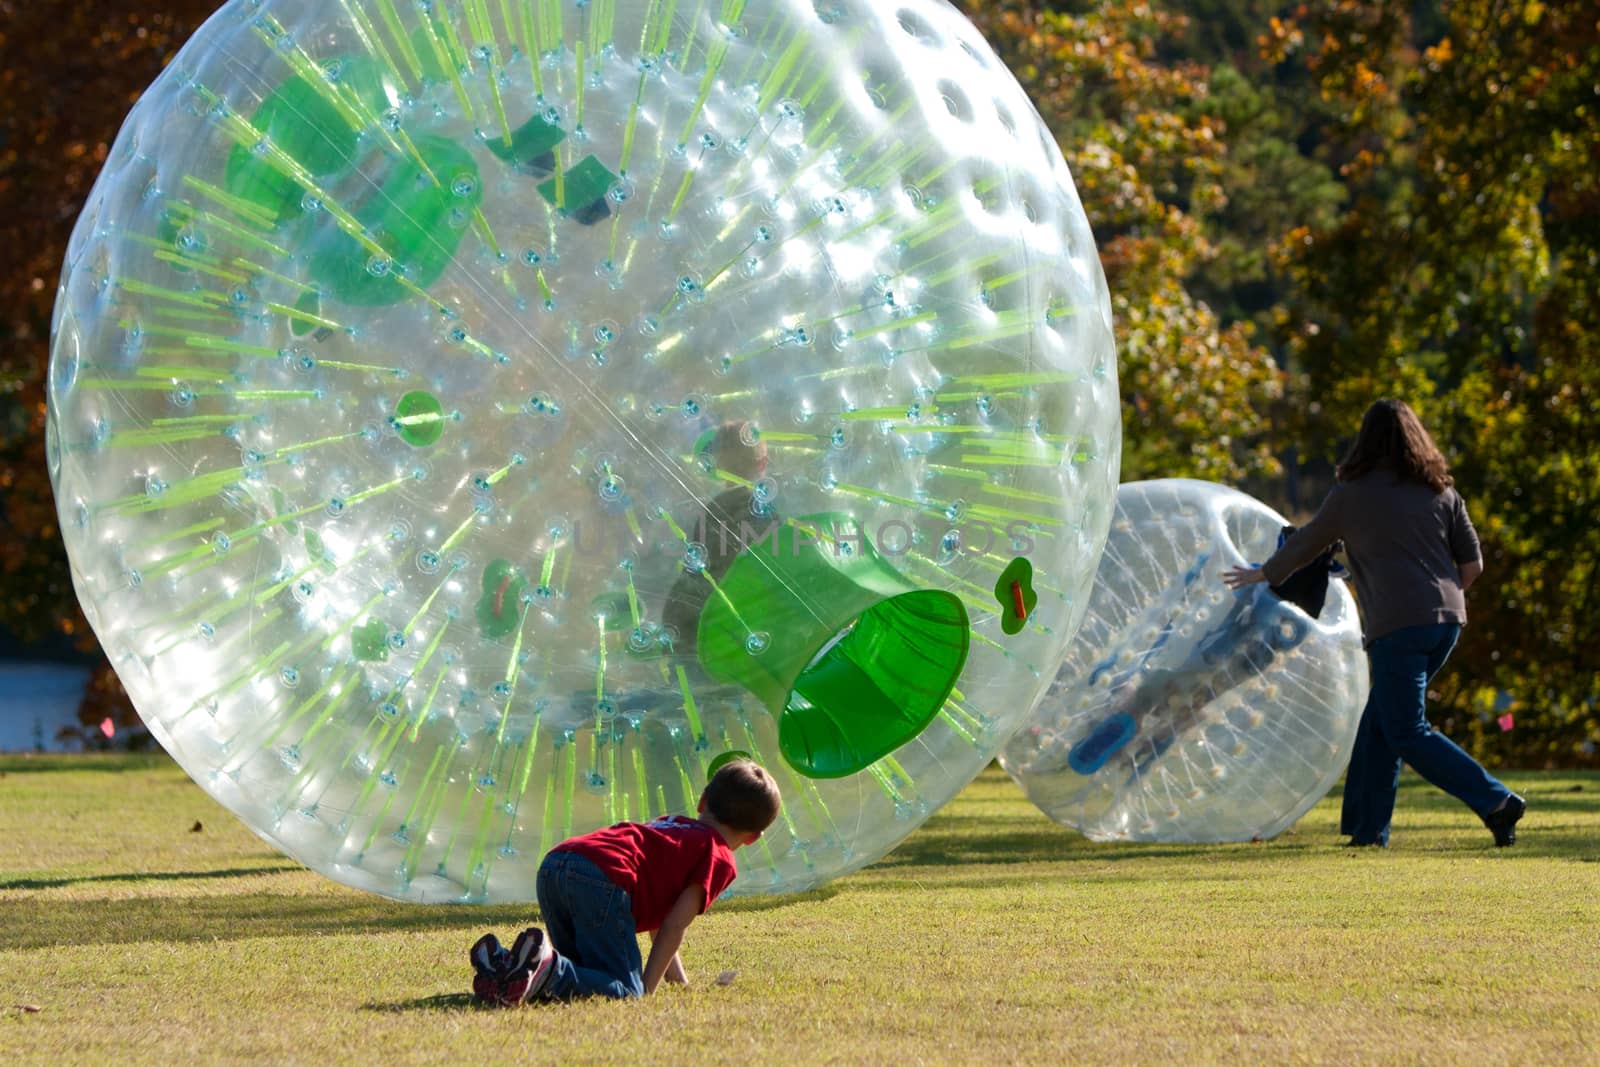 Family Takes Part In Zorbing At Fall Festival by BluIz60